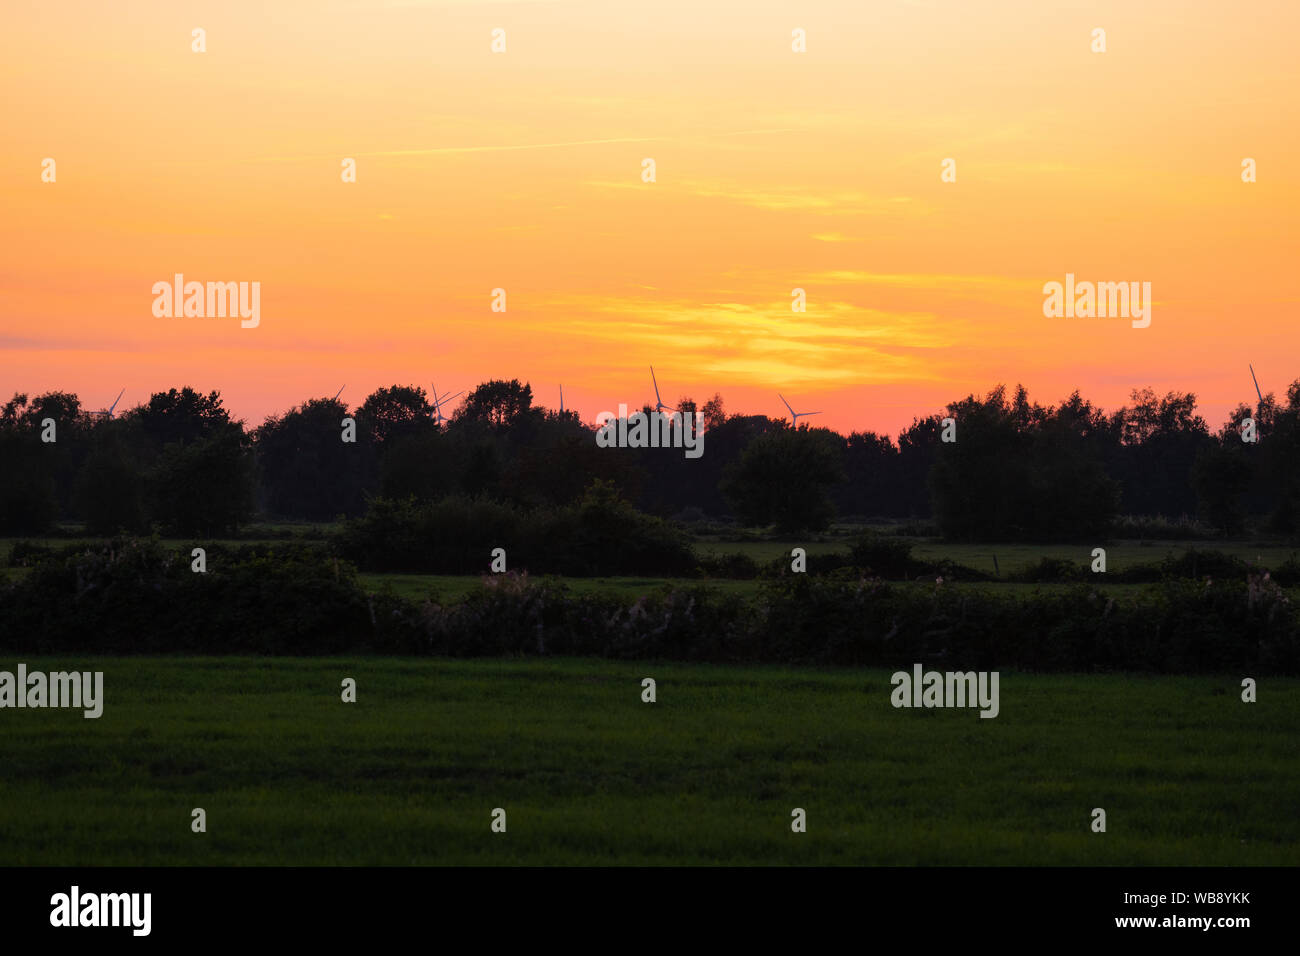 A threatening  sunset behind some trees at a field Stock Photo